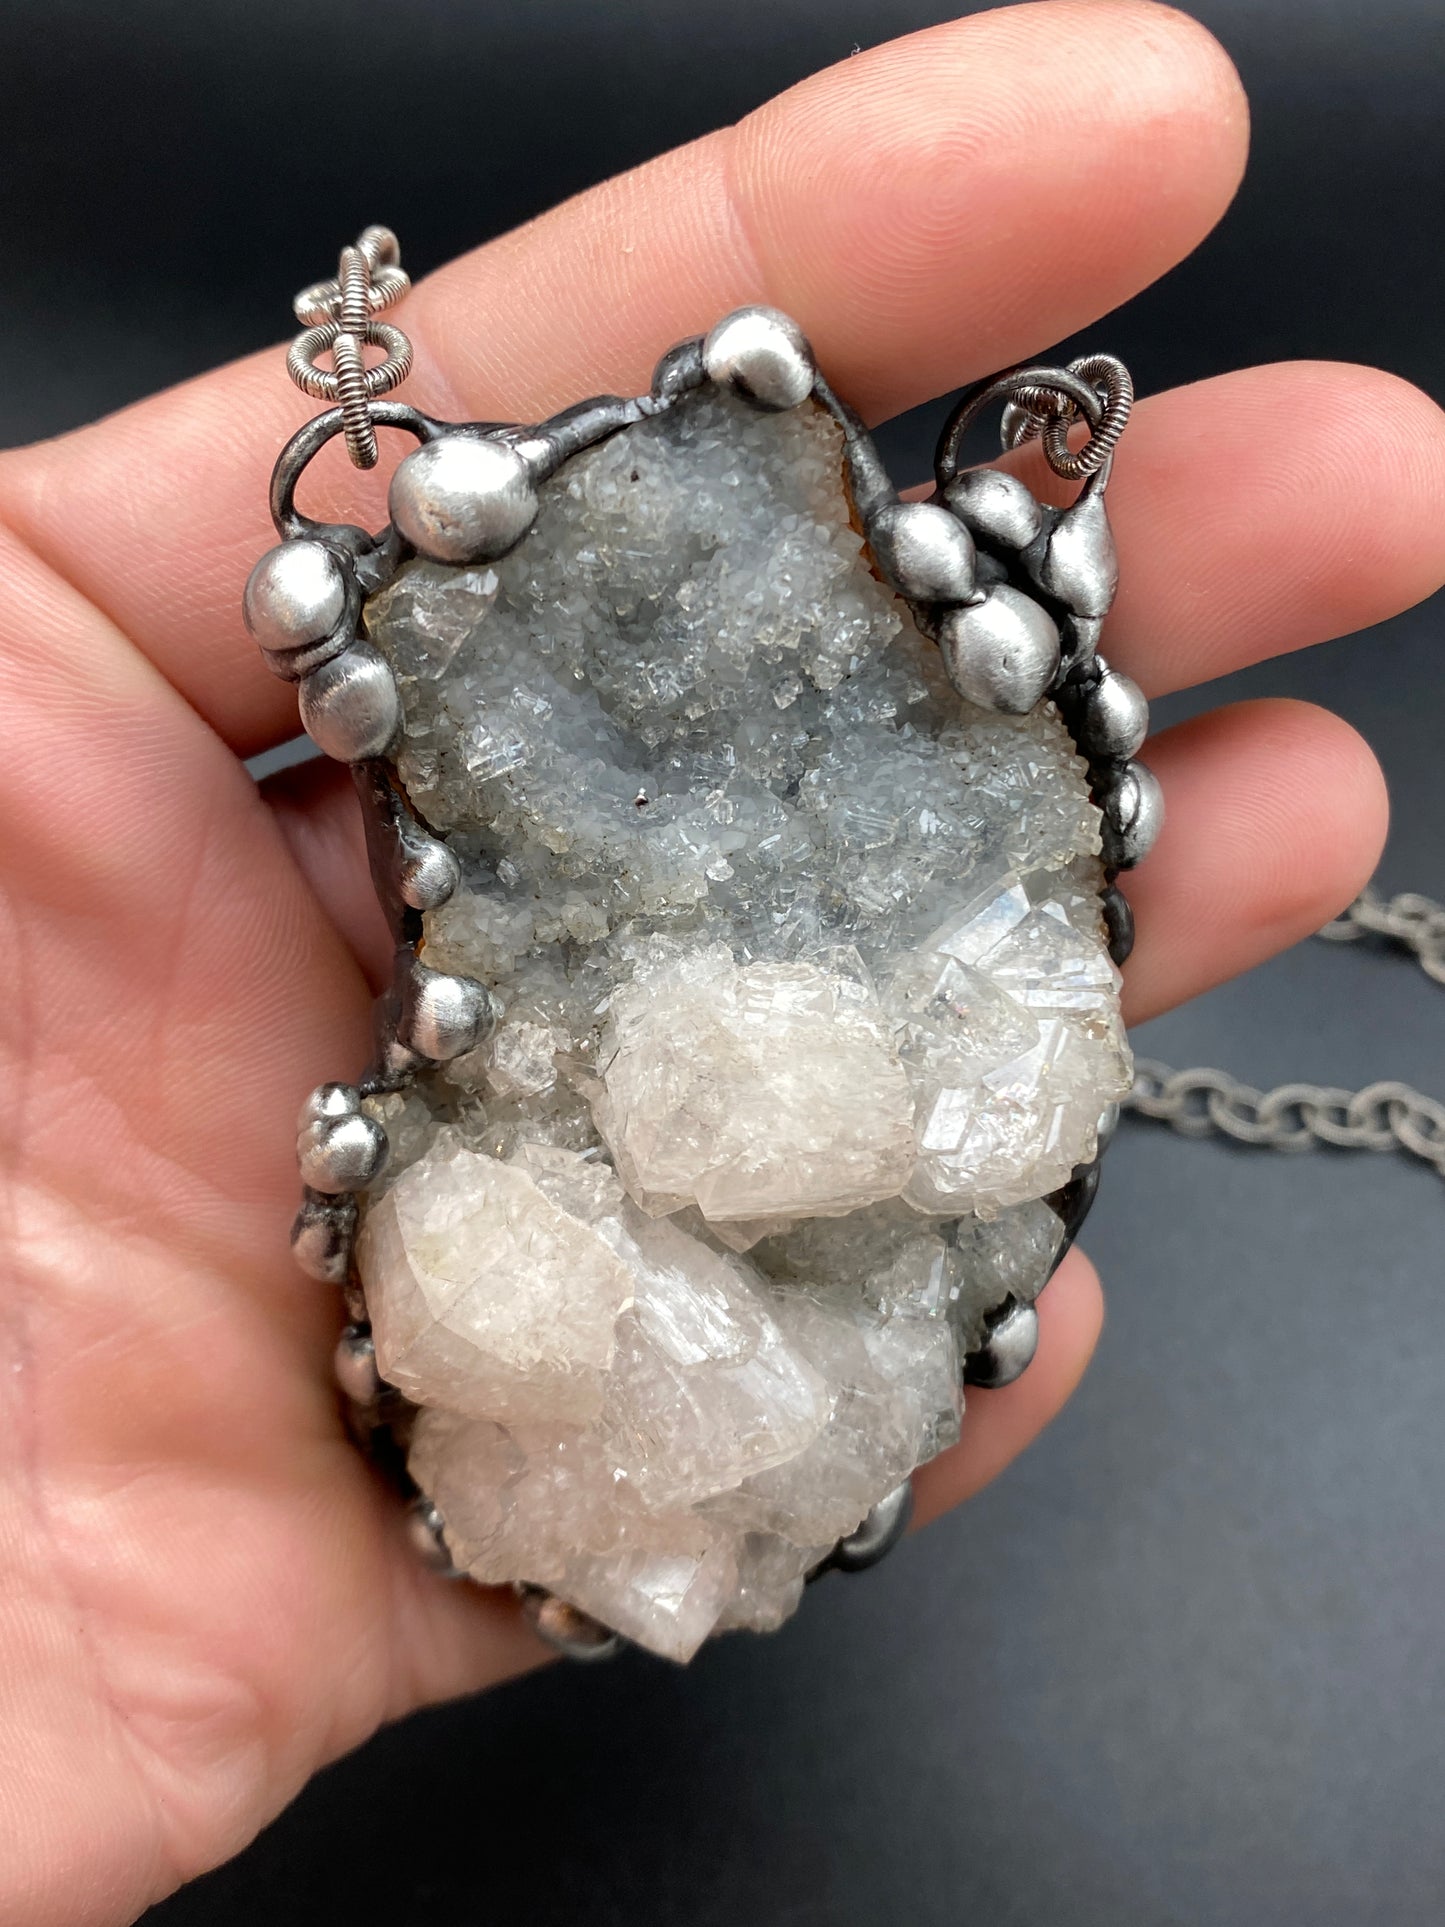 In The Clouds ~ Chalcedony & Apophylite Necklace